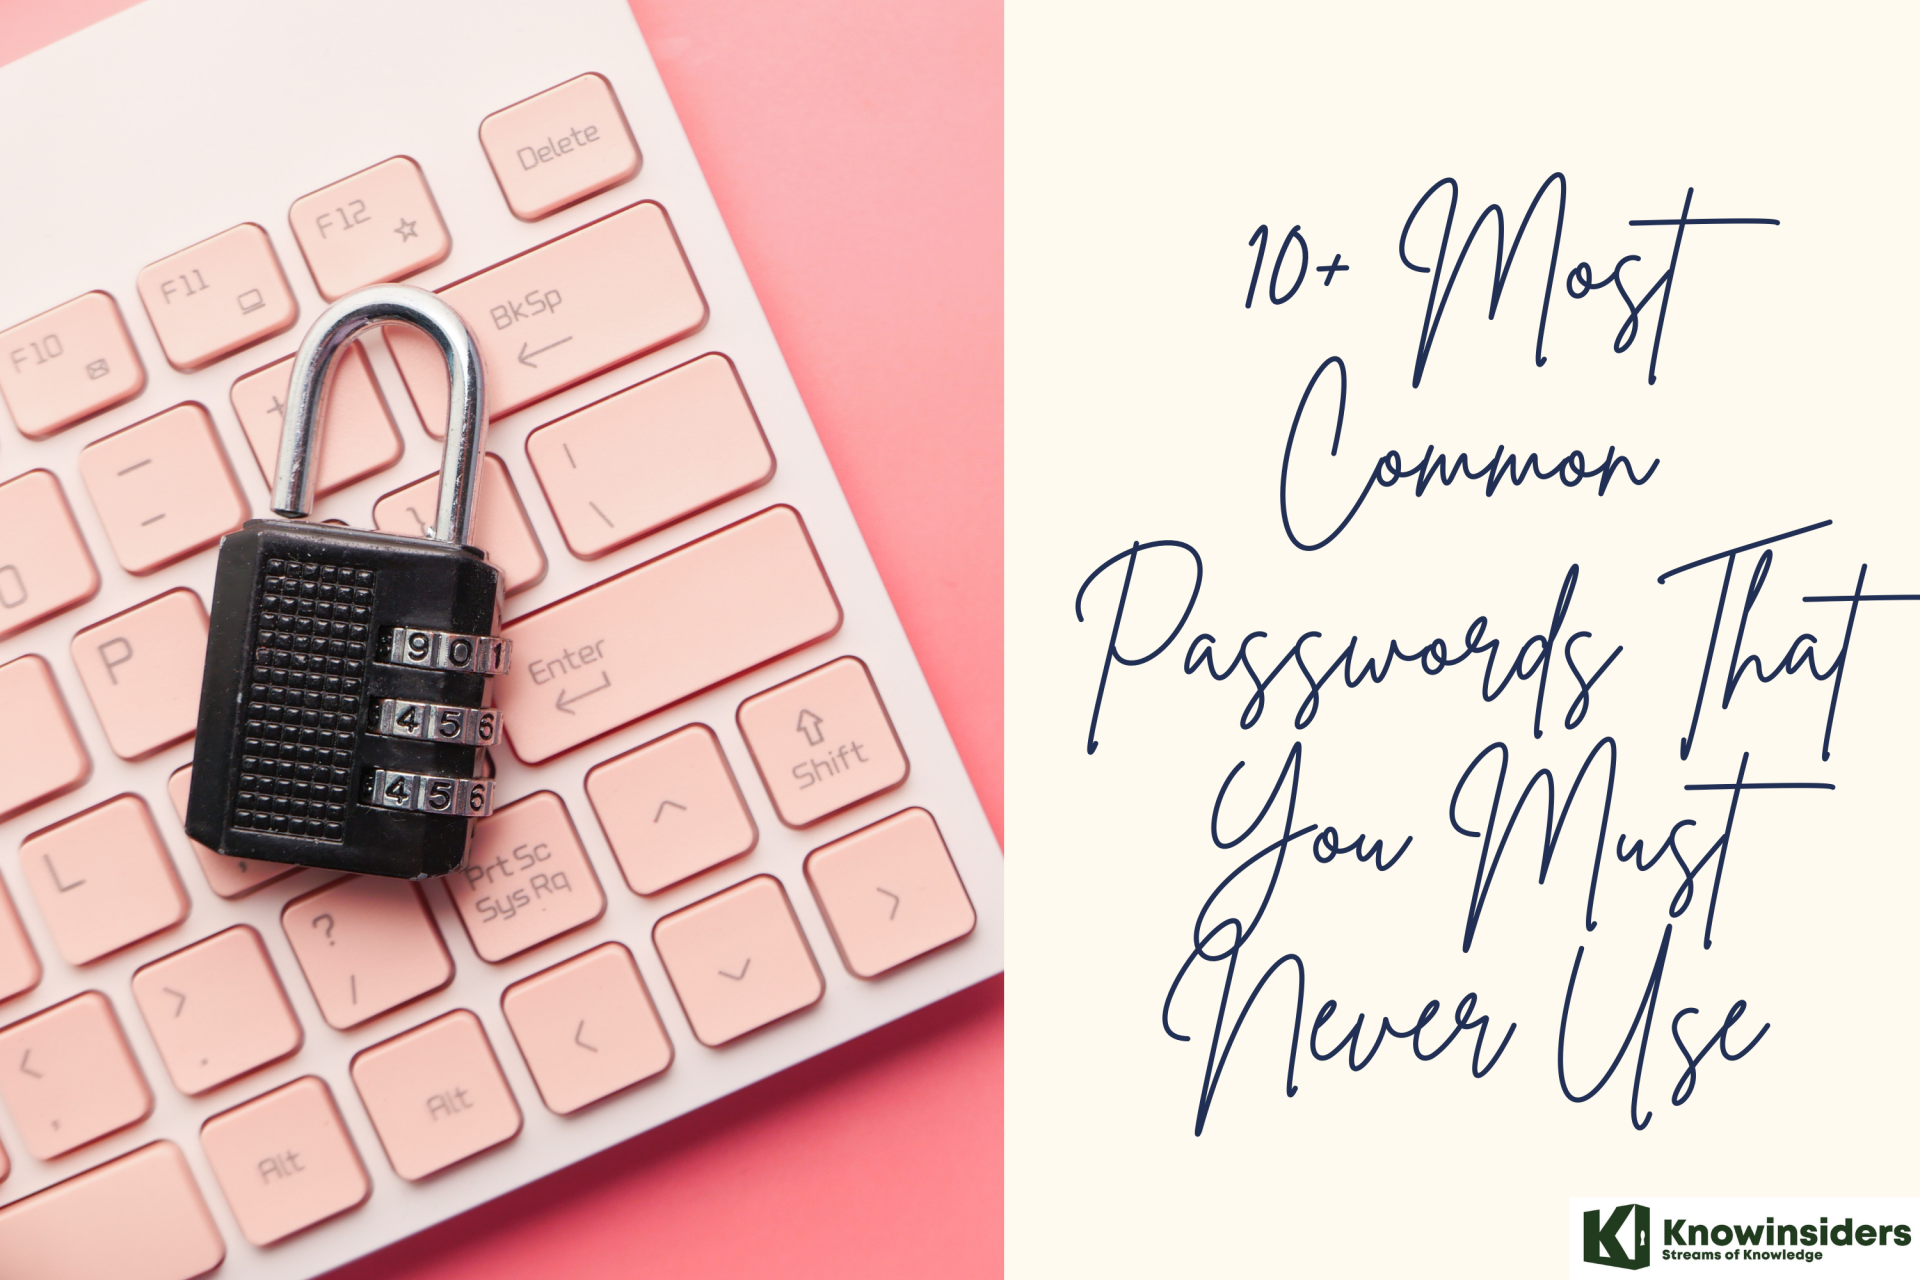 10+ Most Common Passwords That You Never Use